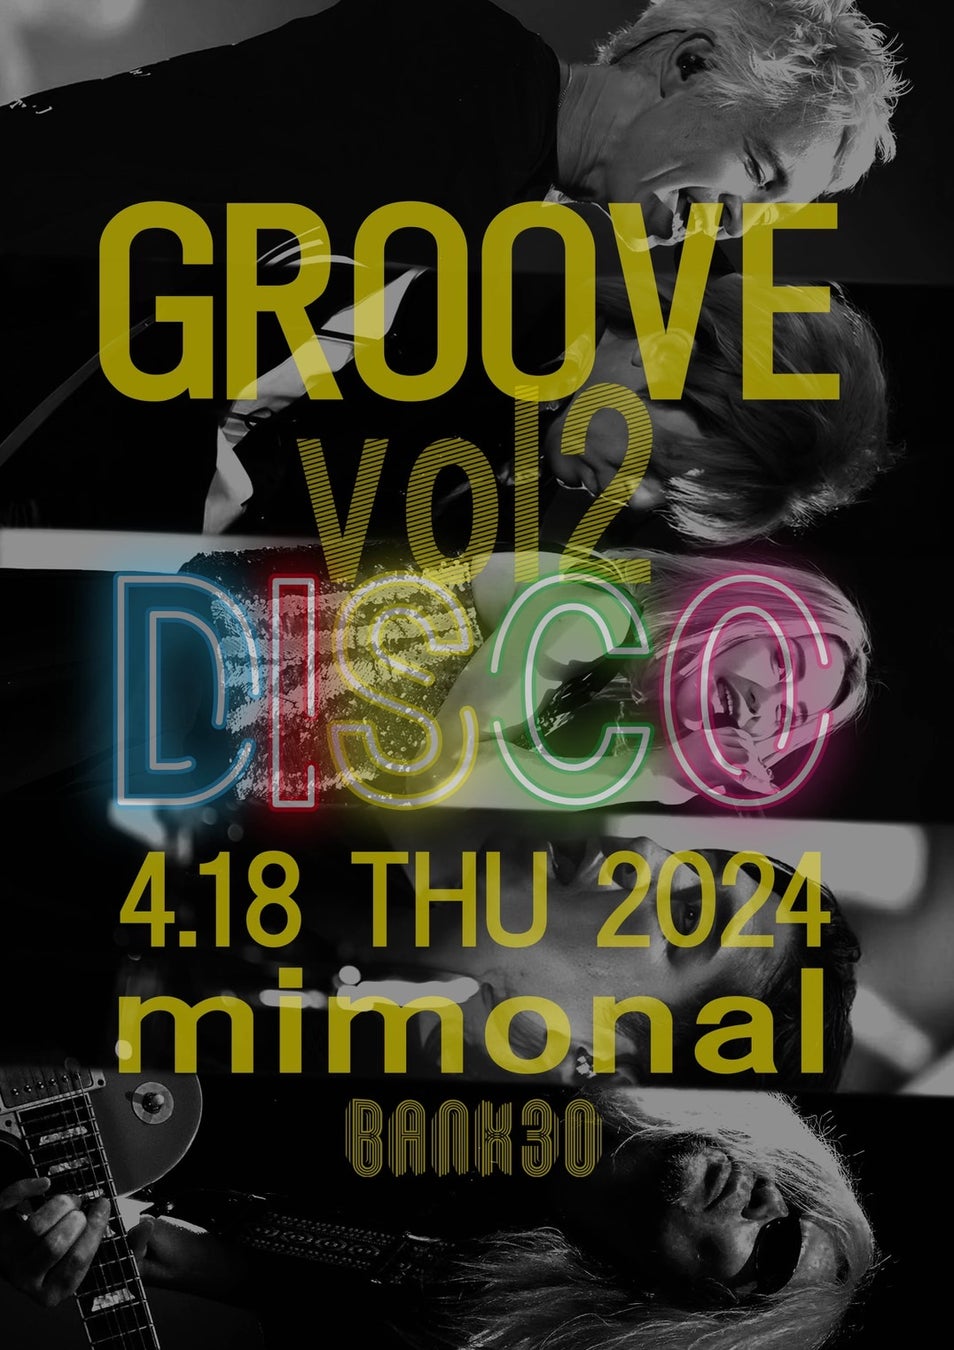 globeマーク・パンサーが参加！“DISCO”をコンセプトにした音楽イベント「GROOVE Vol.2 DISCO Presented by mimonal」TIGETにてチケット独占受付開始